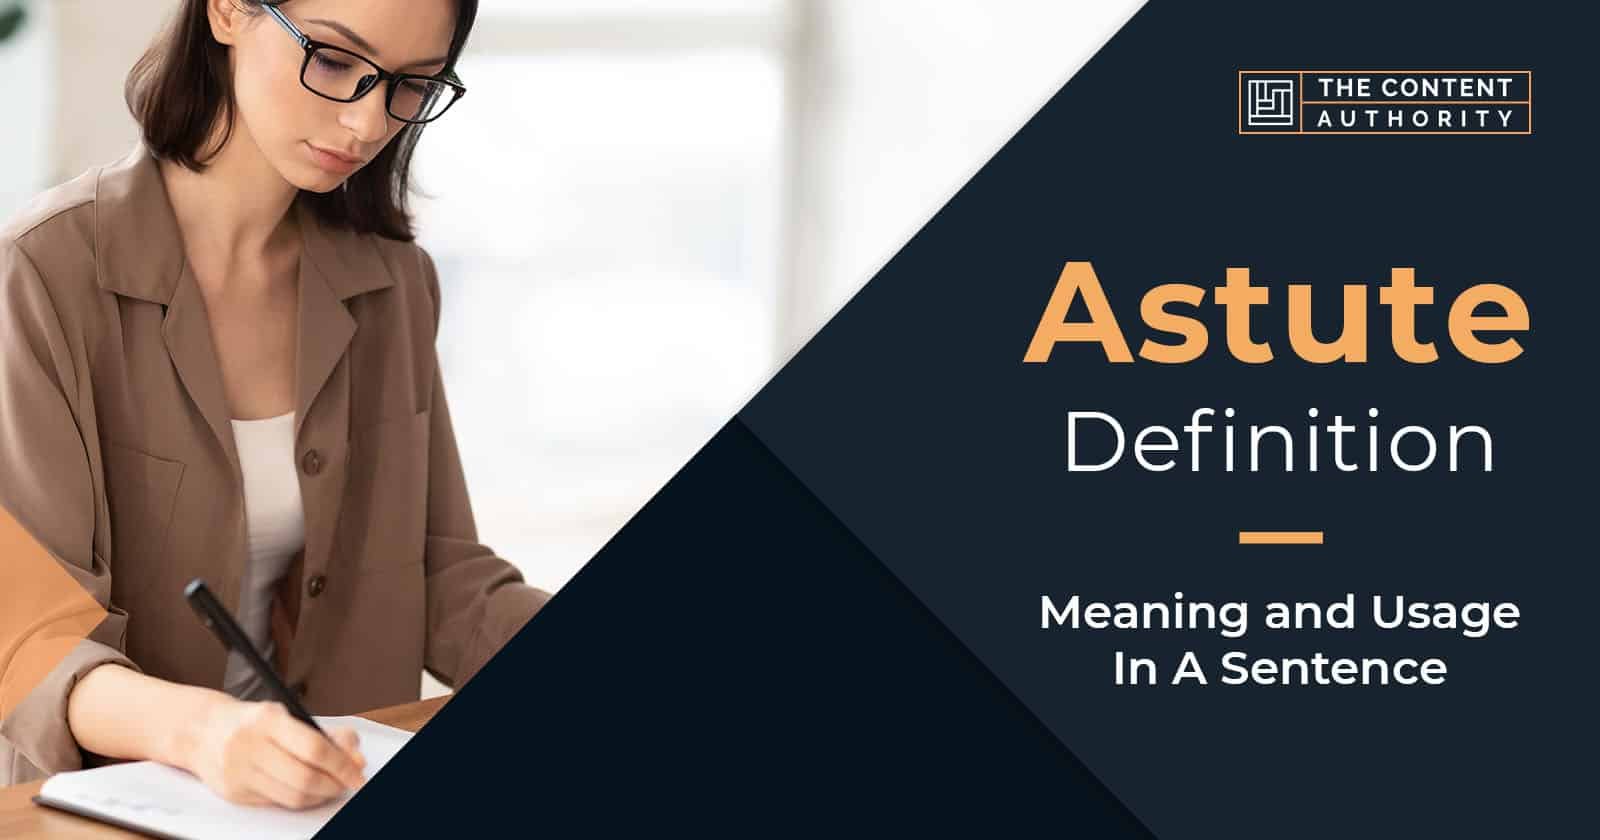 Astute Definition – Meaning and Usage in a Sentence